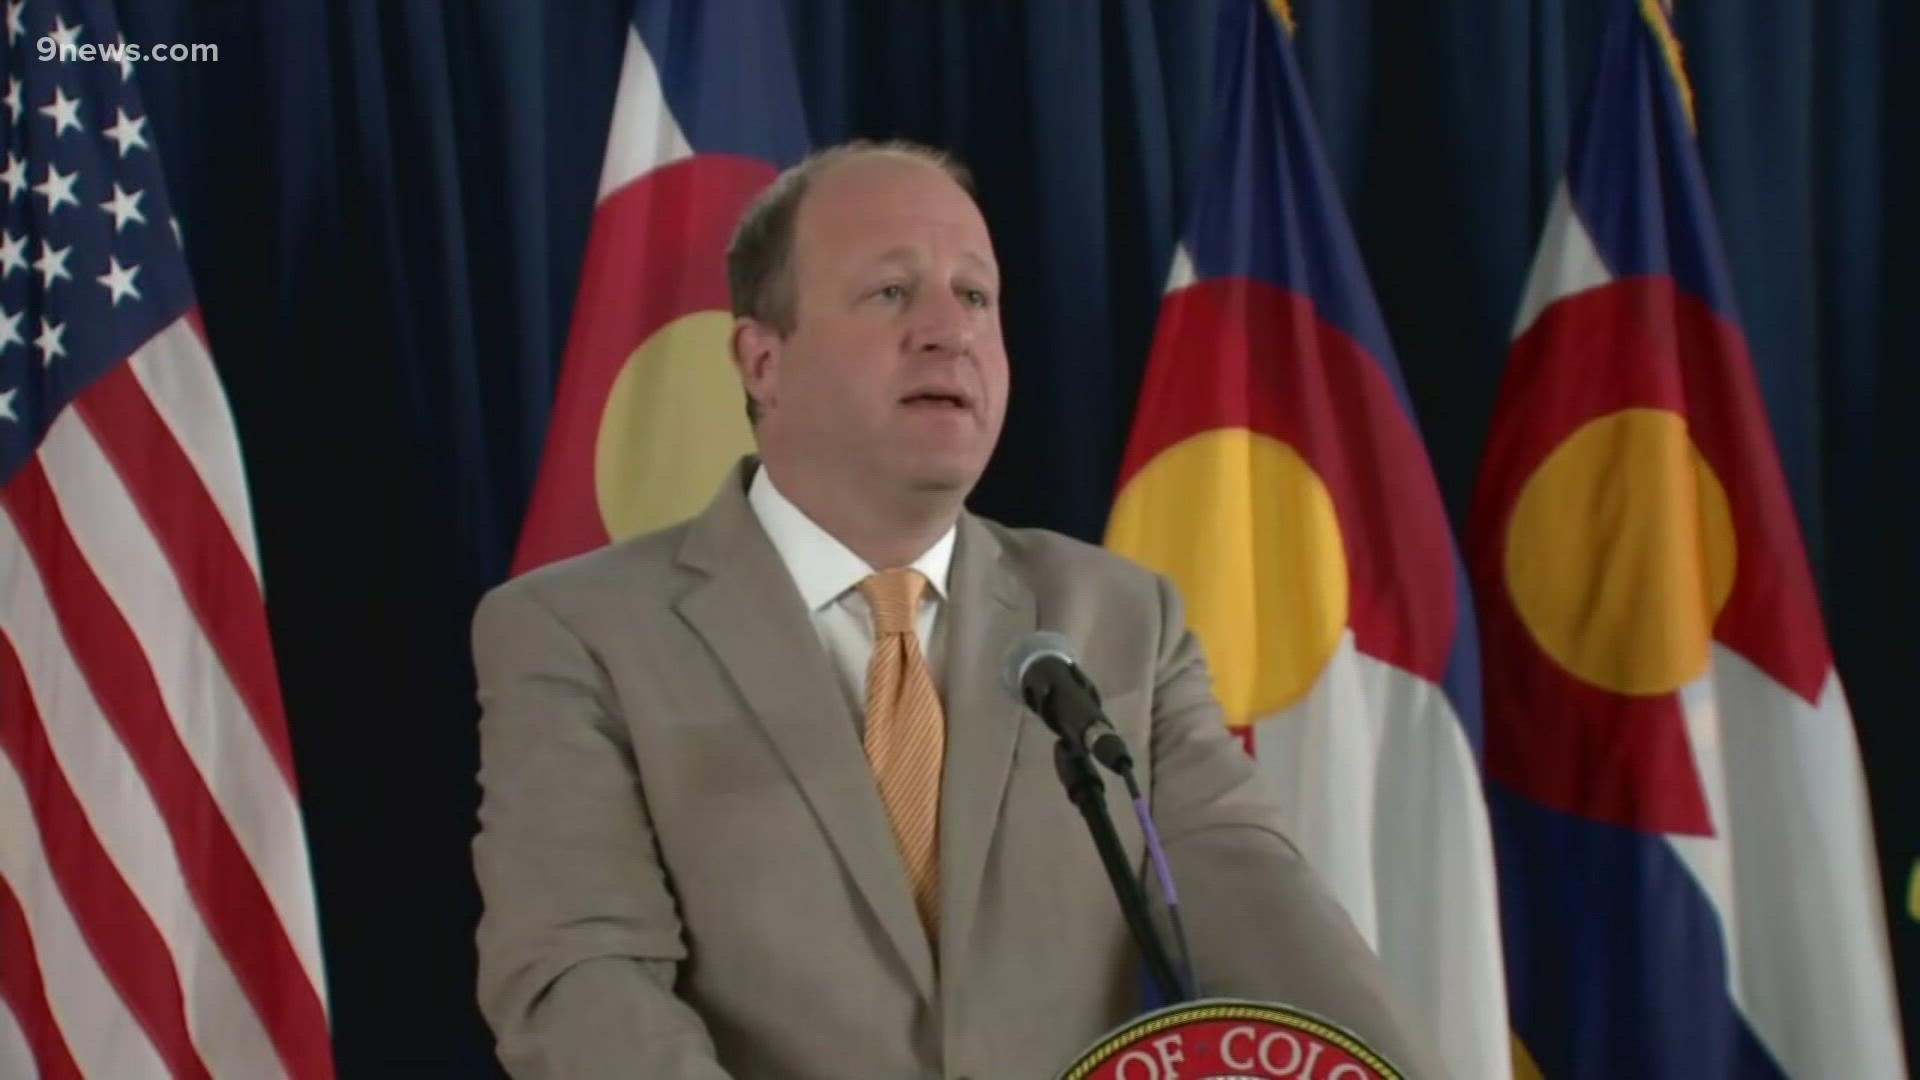 Gov. Jared Polis said he's not considering any statewide mitigation measures, as several metro Denver counties are re-enacting mask mandates.